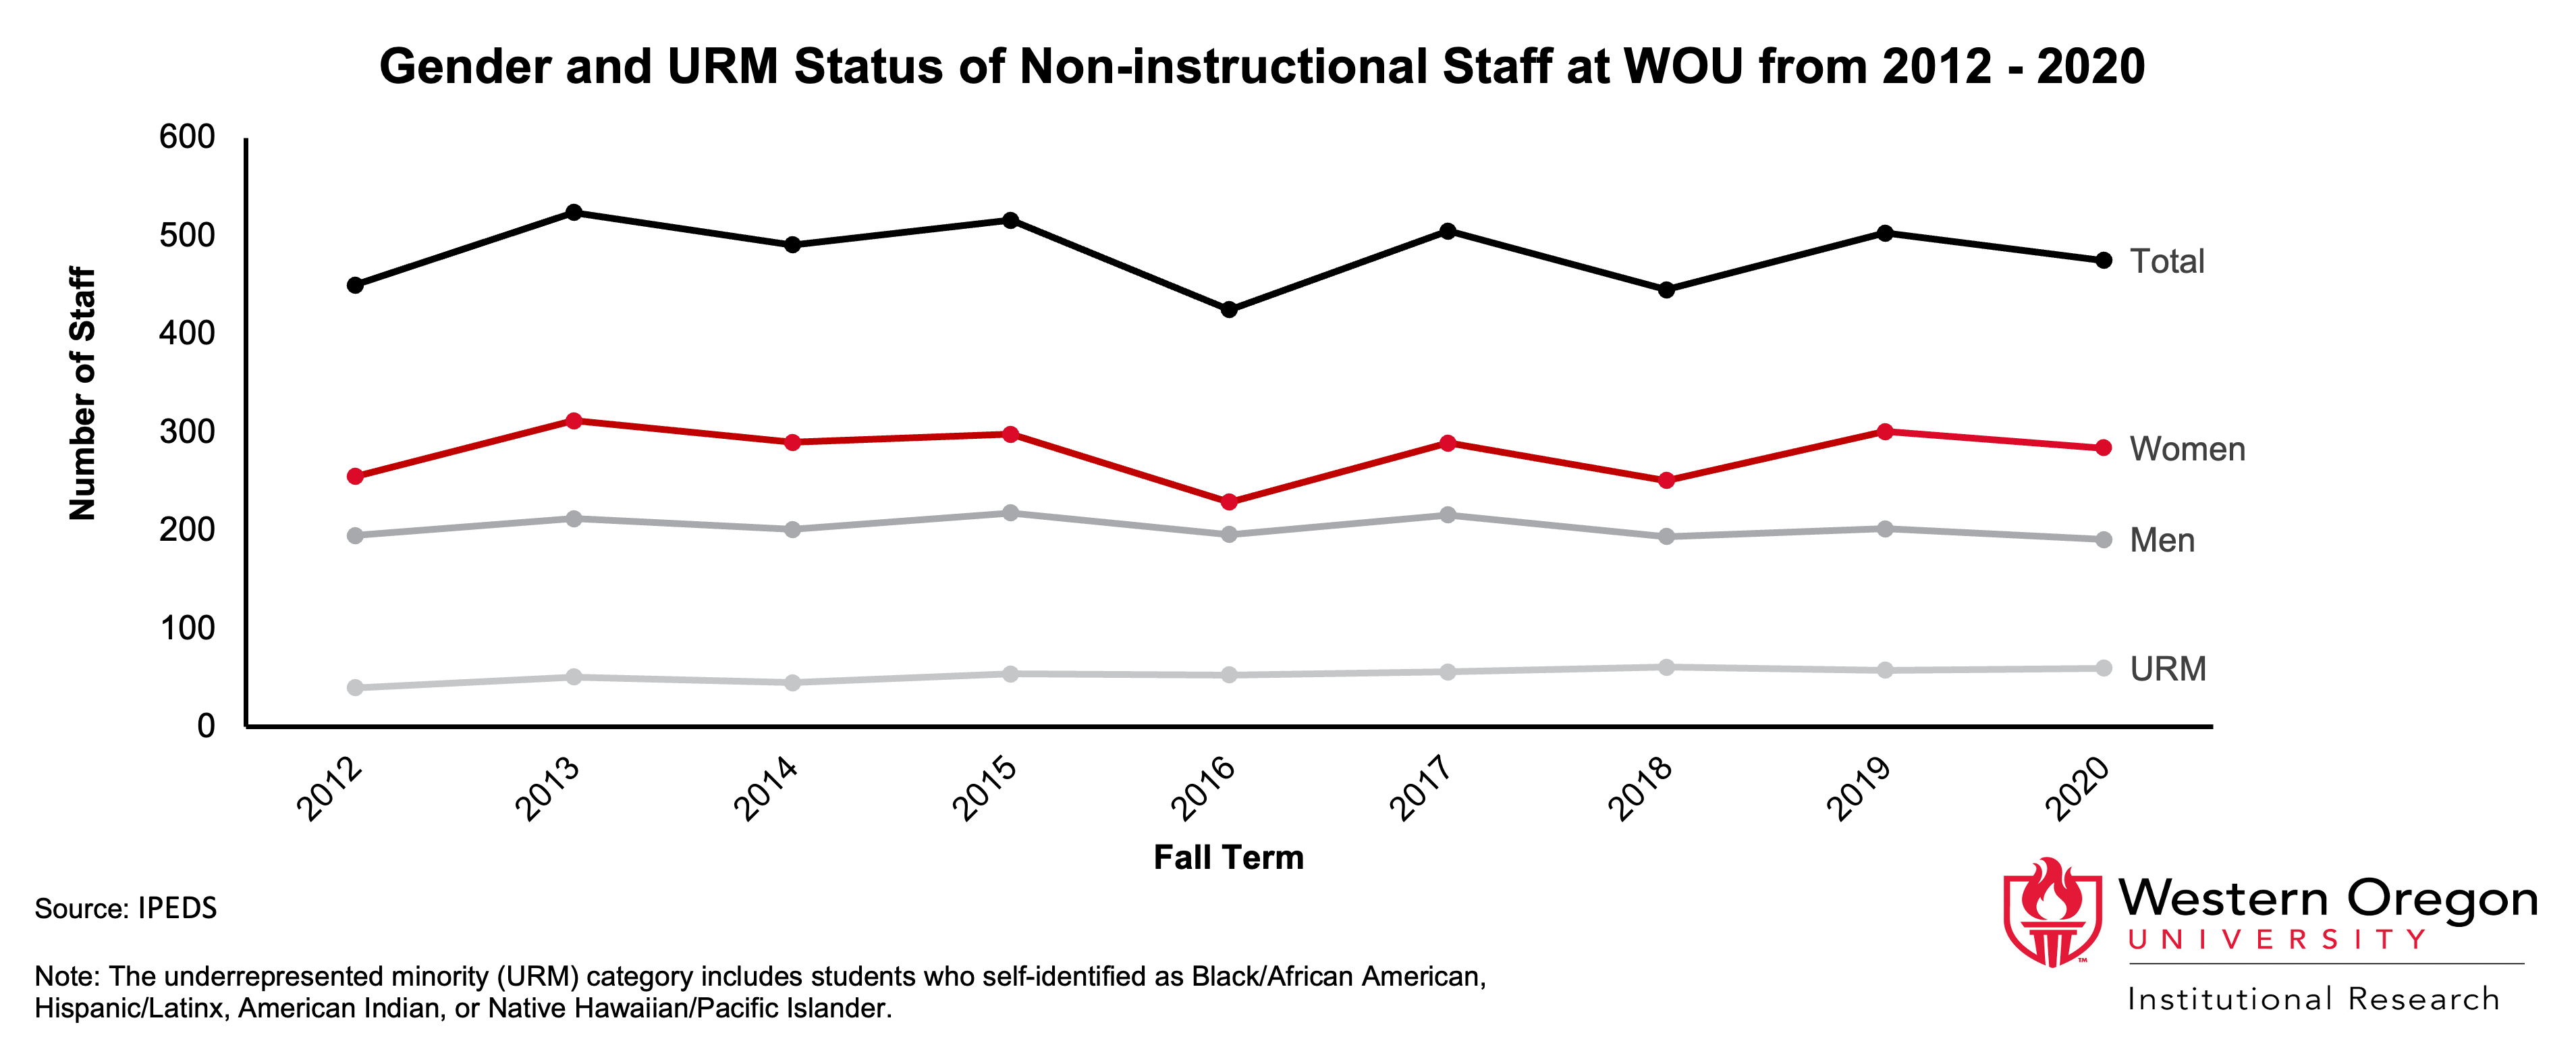 Line graph of gender and URM status of non-instructional staff at WOU from 2012 to 2020, showing that women outnumber men and that URM represent a small proportion of the total.